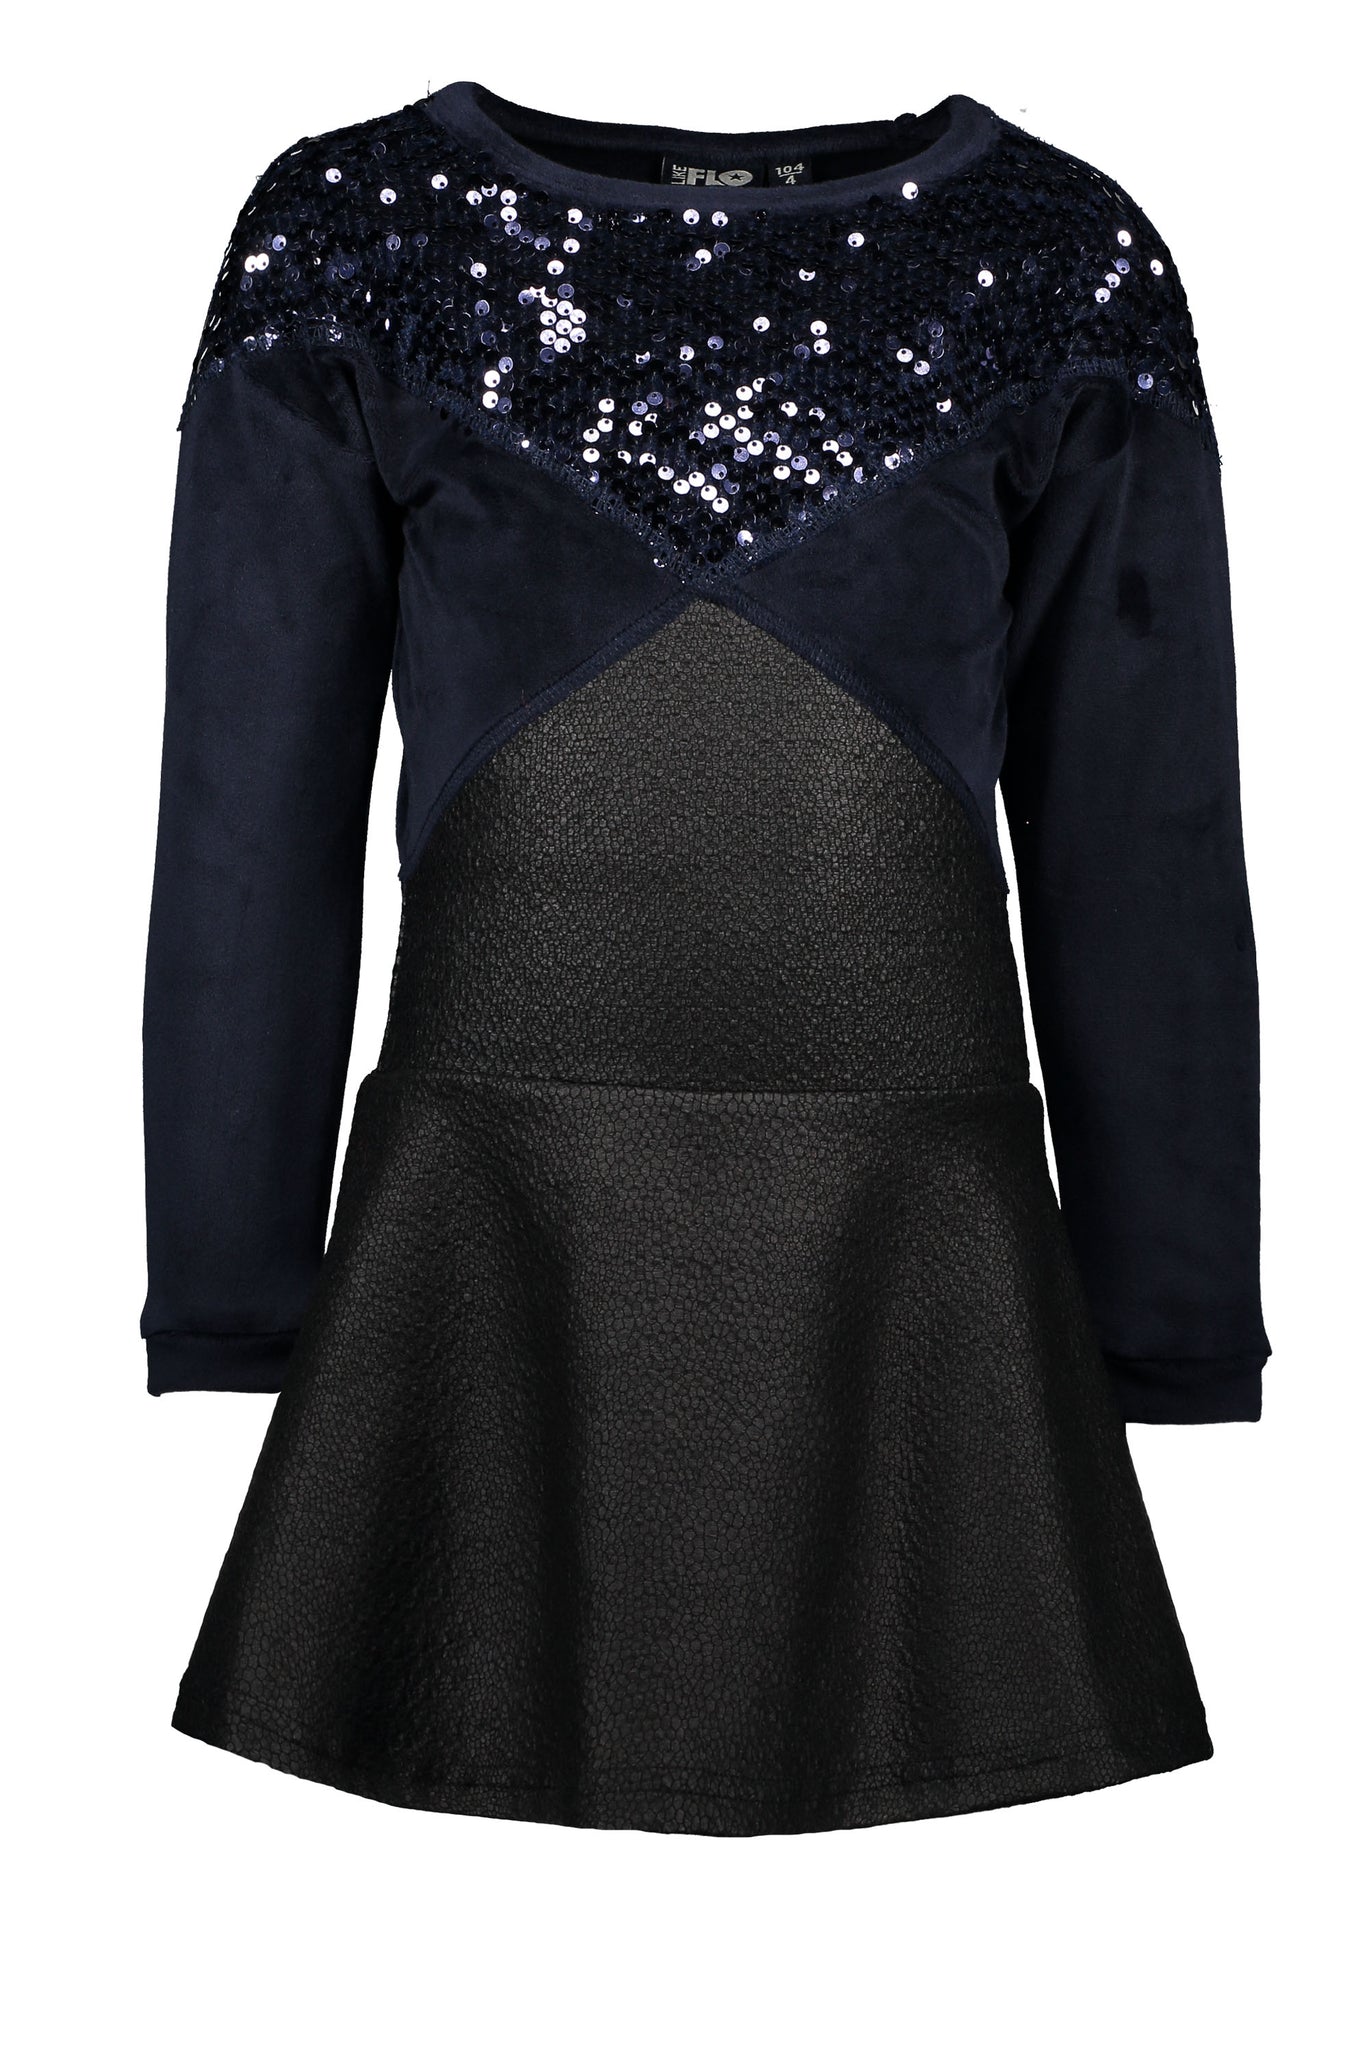 FLO Girls Dress with Sequin